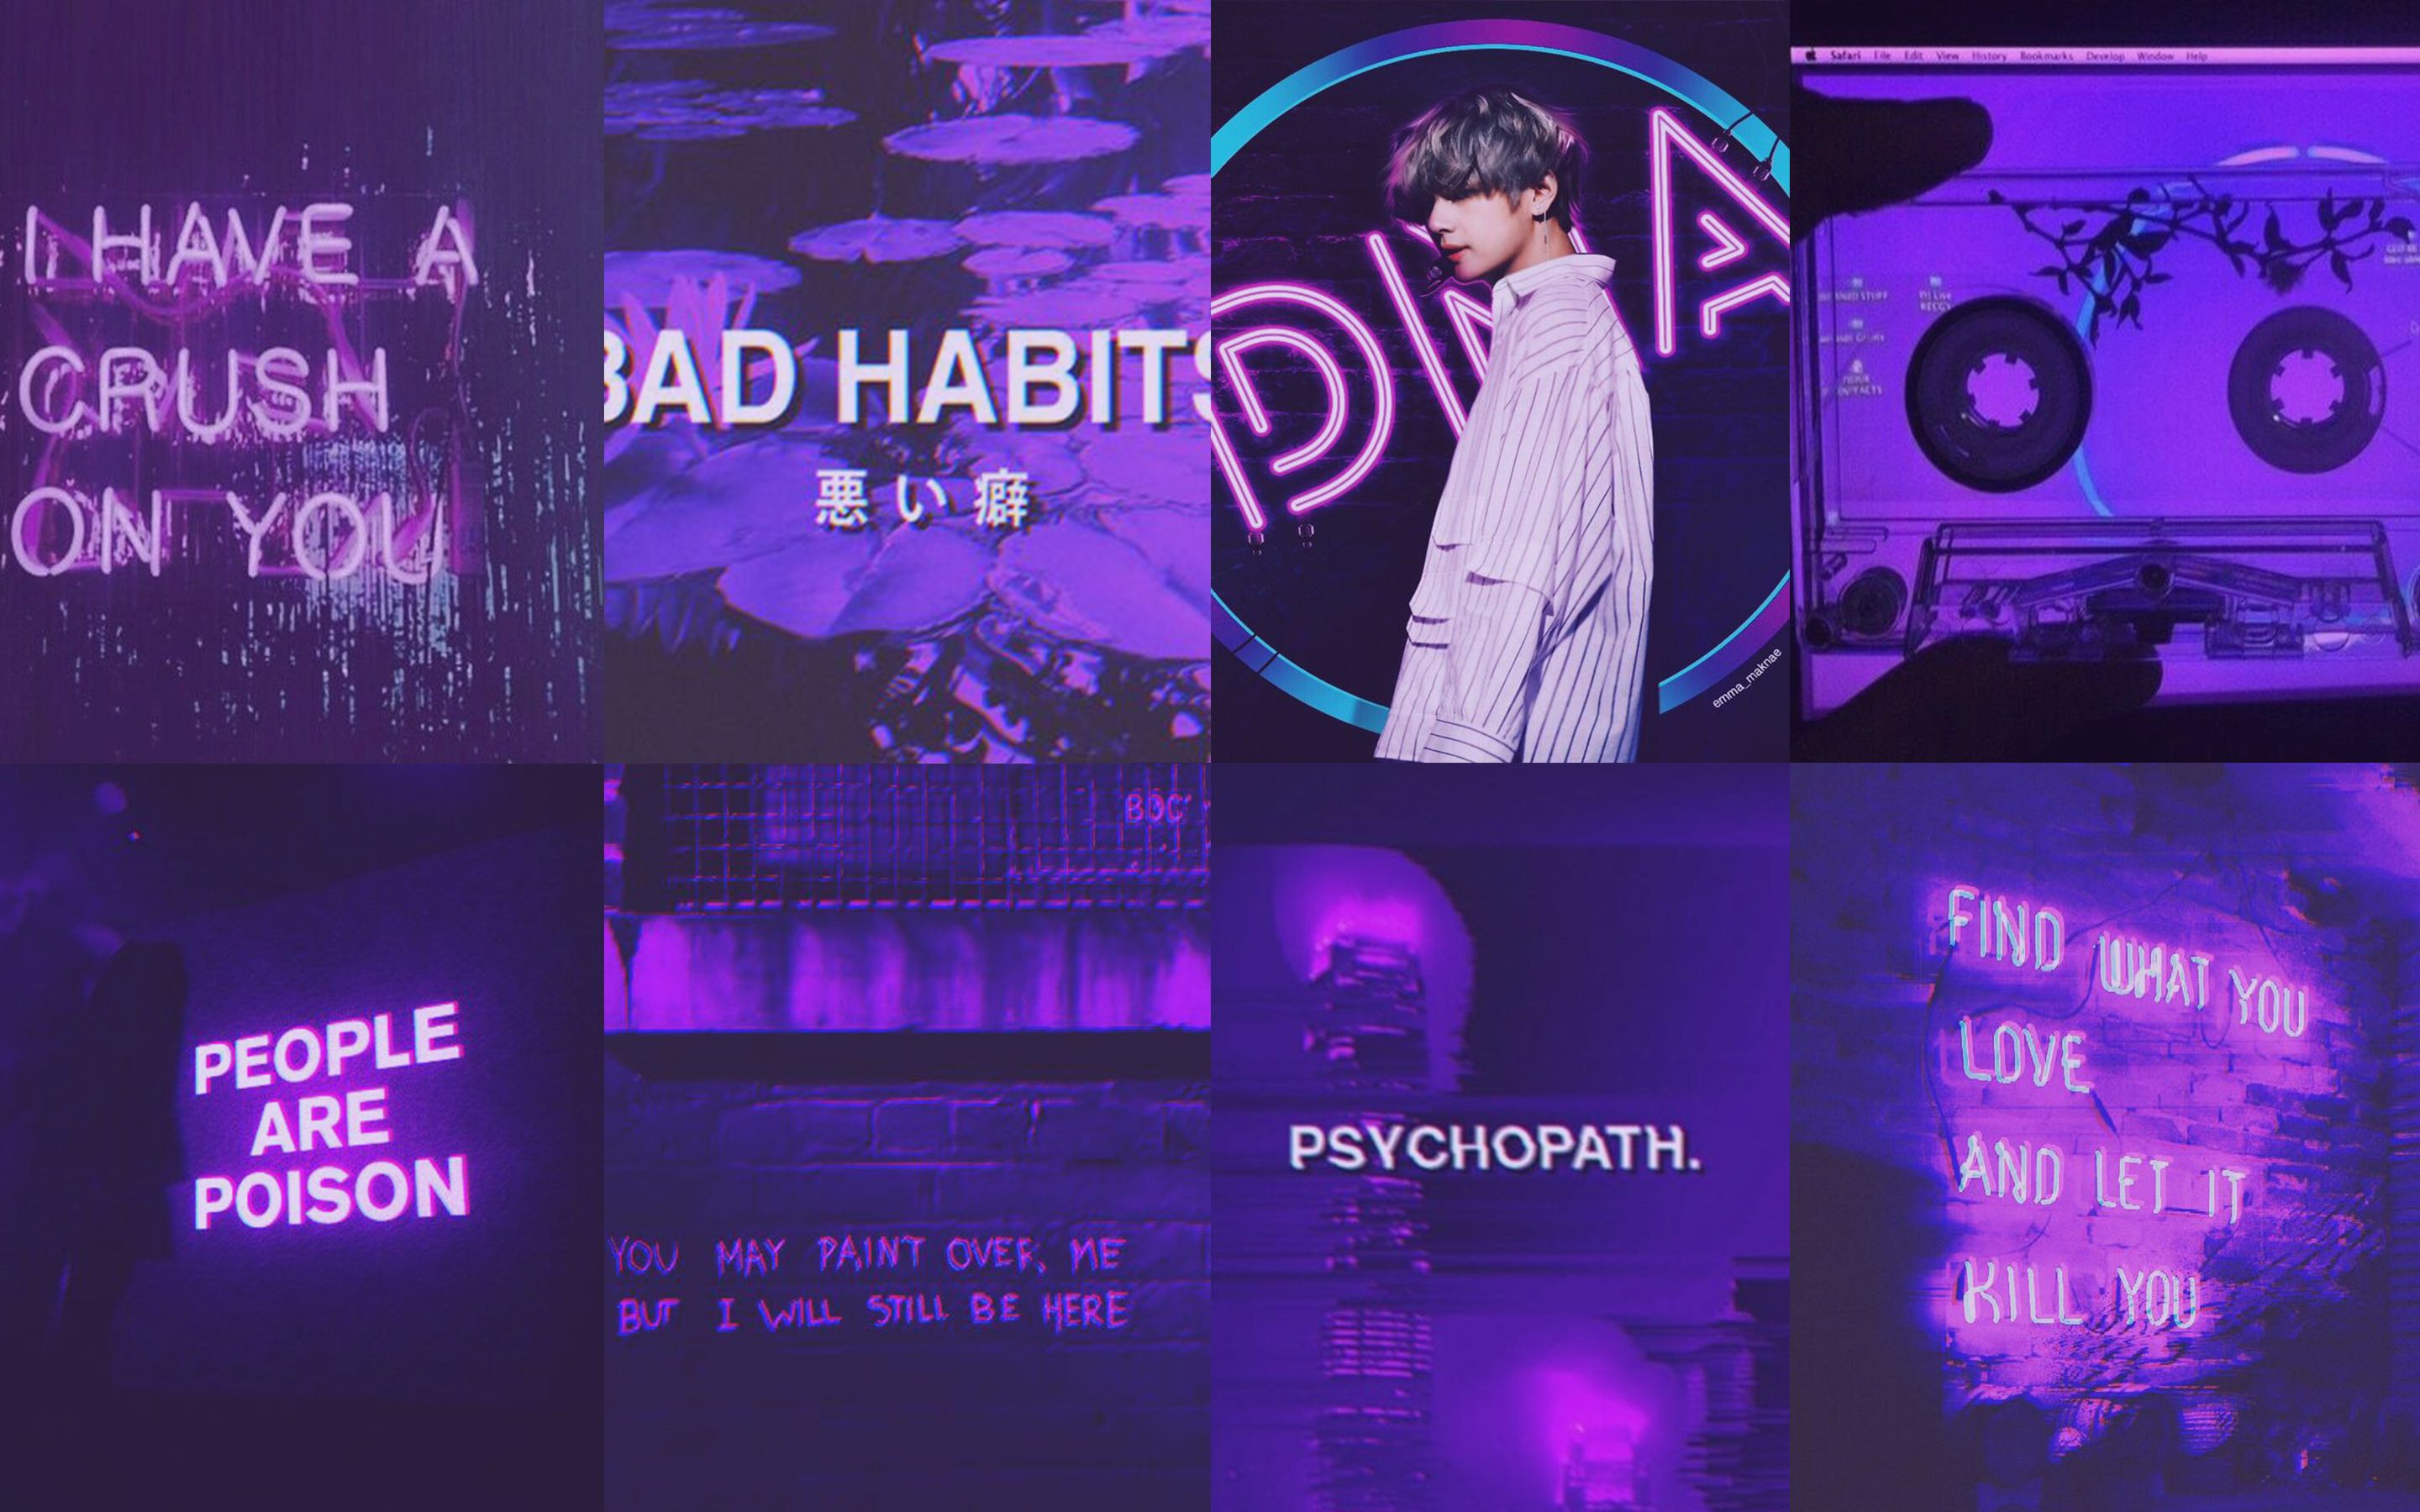 Bts Aesthetic Wallpaper Hd Purple And for the admin, if you are using bts's image, at least do it well. bts aesthetic wallpaper hd purple